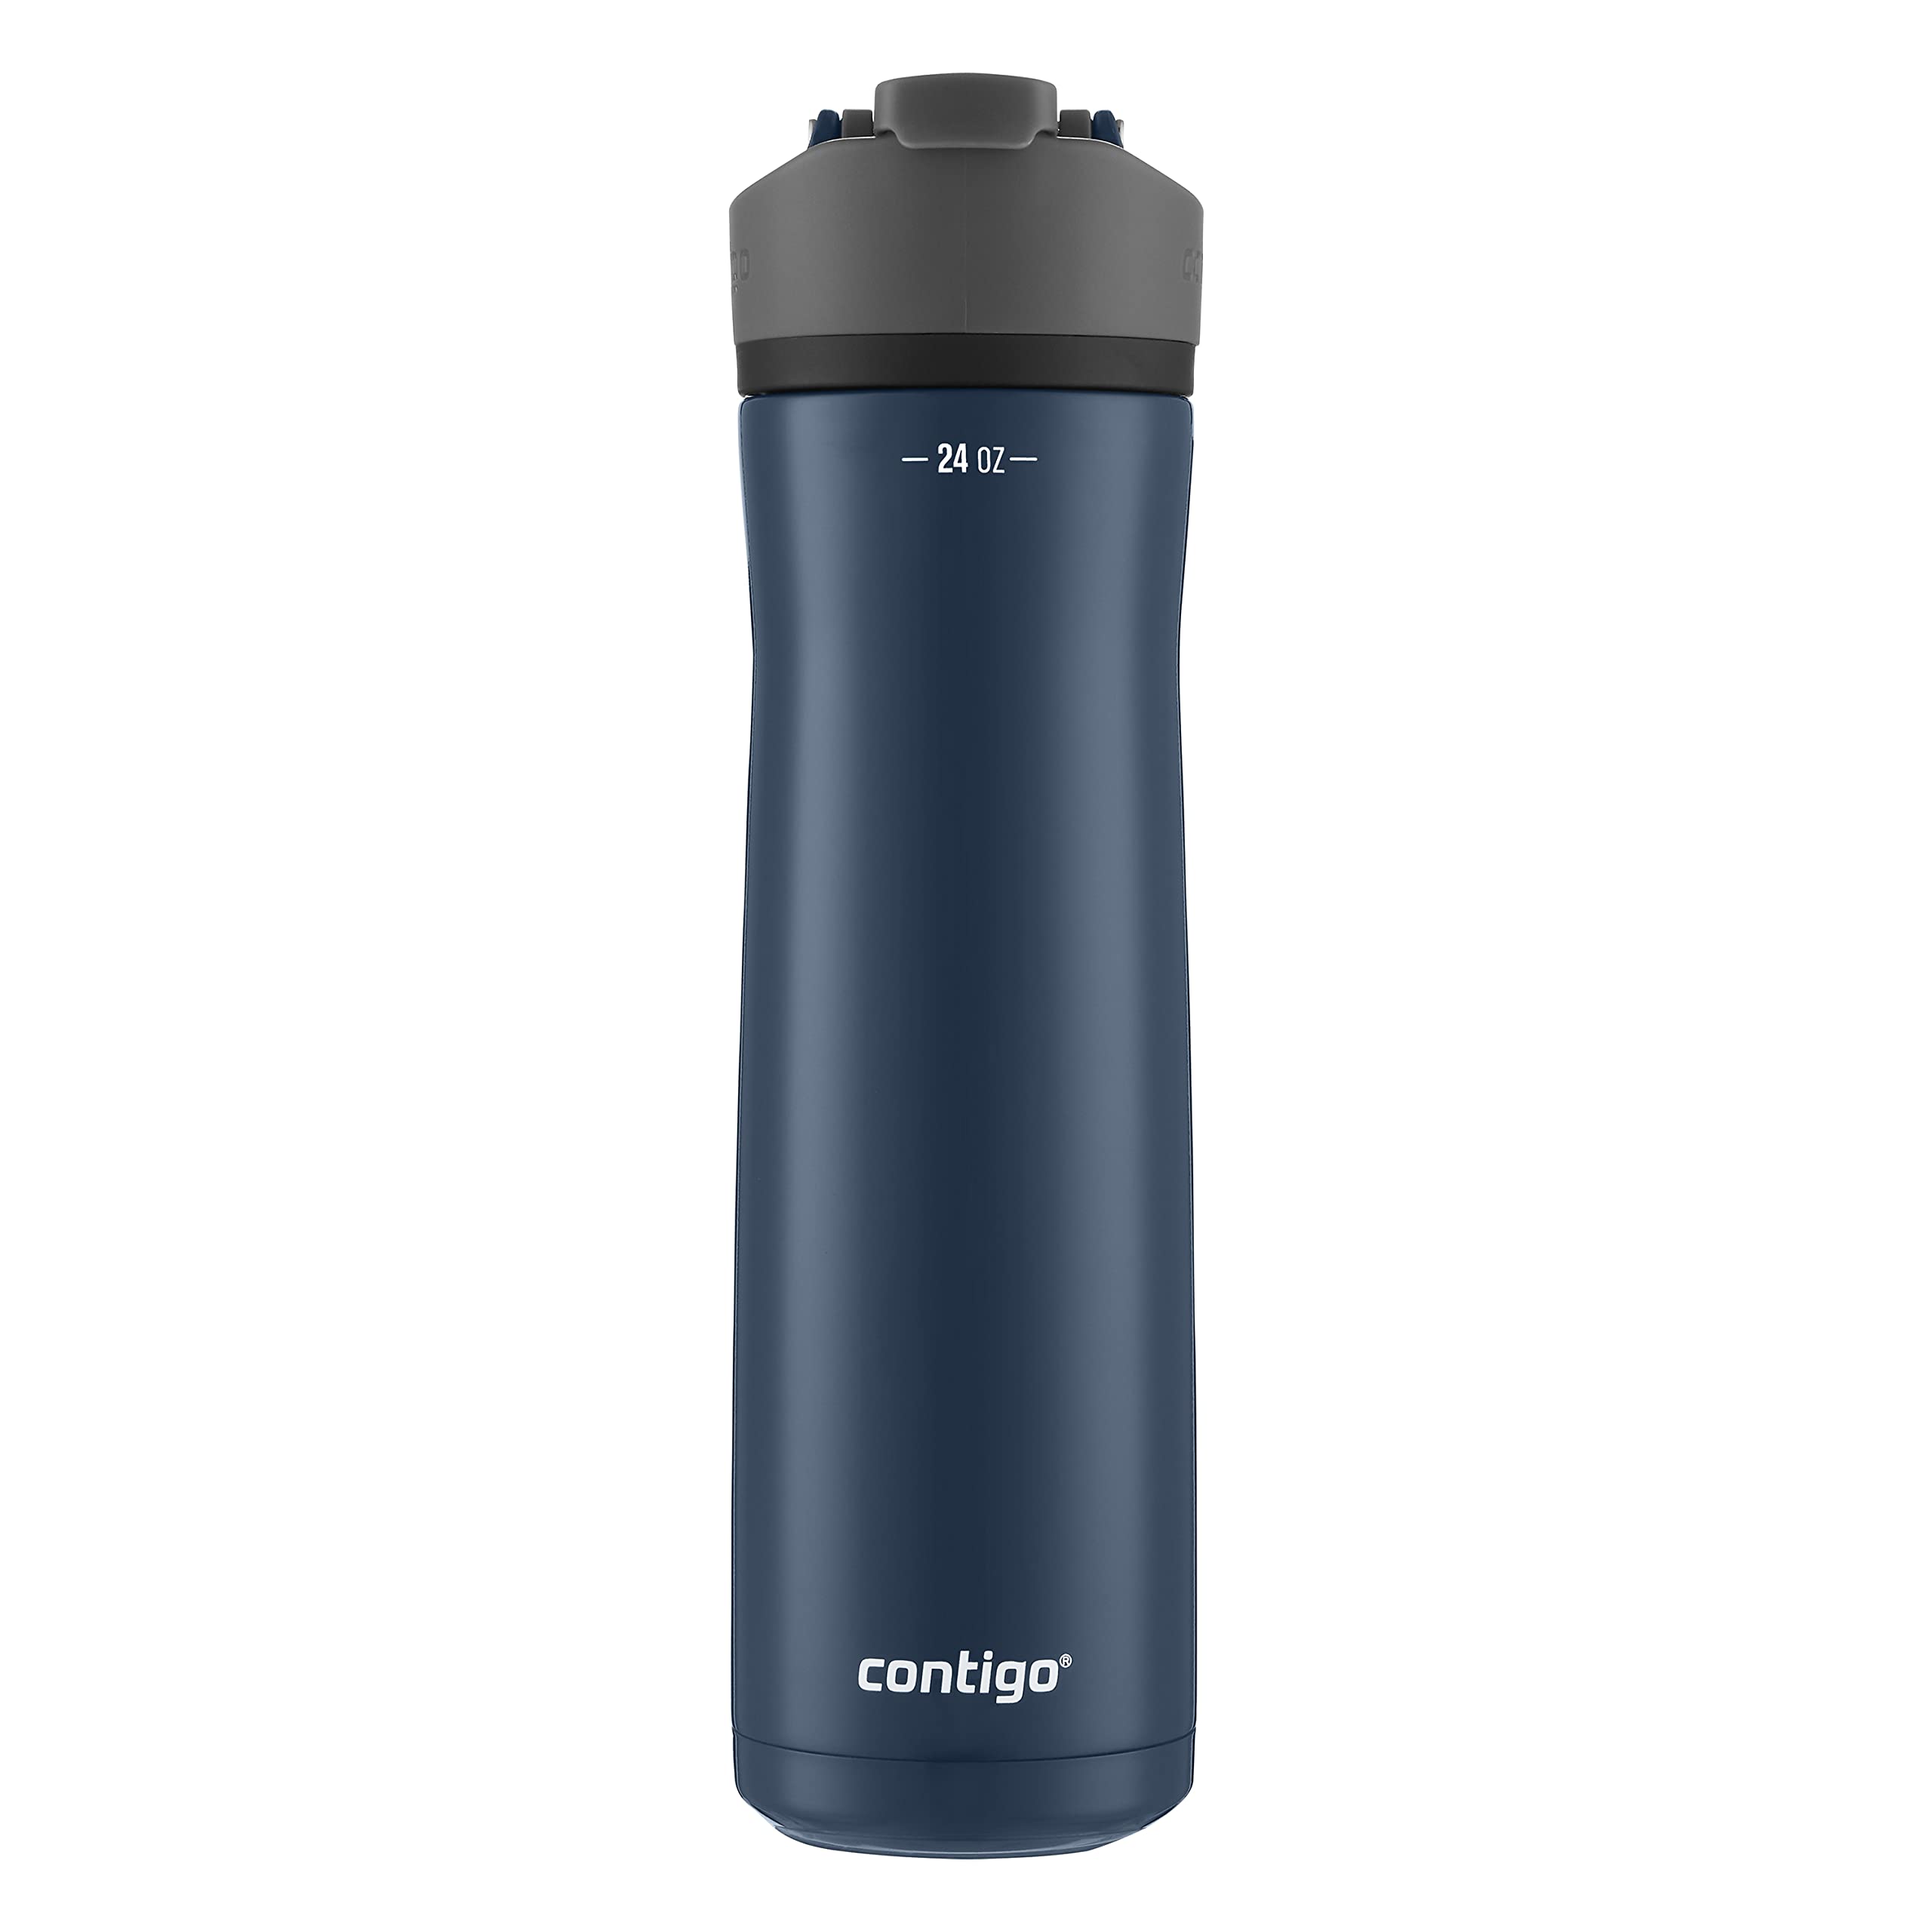 Contigo Cortland Chill 2.0 Stainless Steel Vacuum-Insulated Water Bottle with Spill-Proof Lid, Keeps Drinks Hot or Cold for Hours with Interchangeable Lid, 24oz, Blueberry 24oz Blueberry